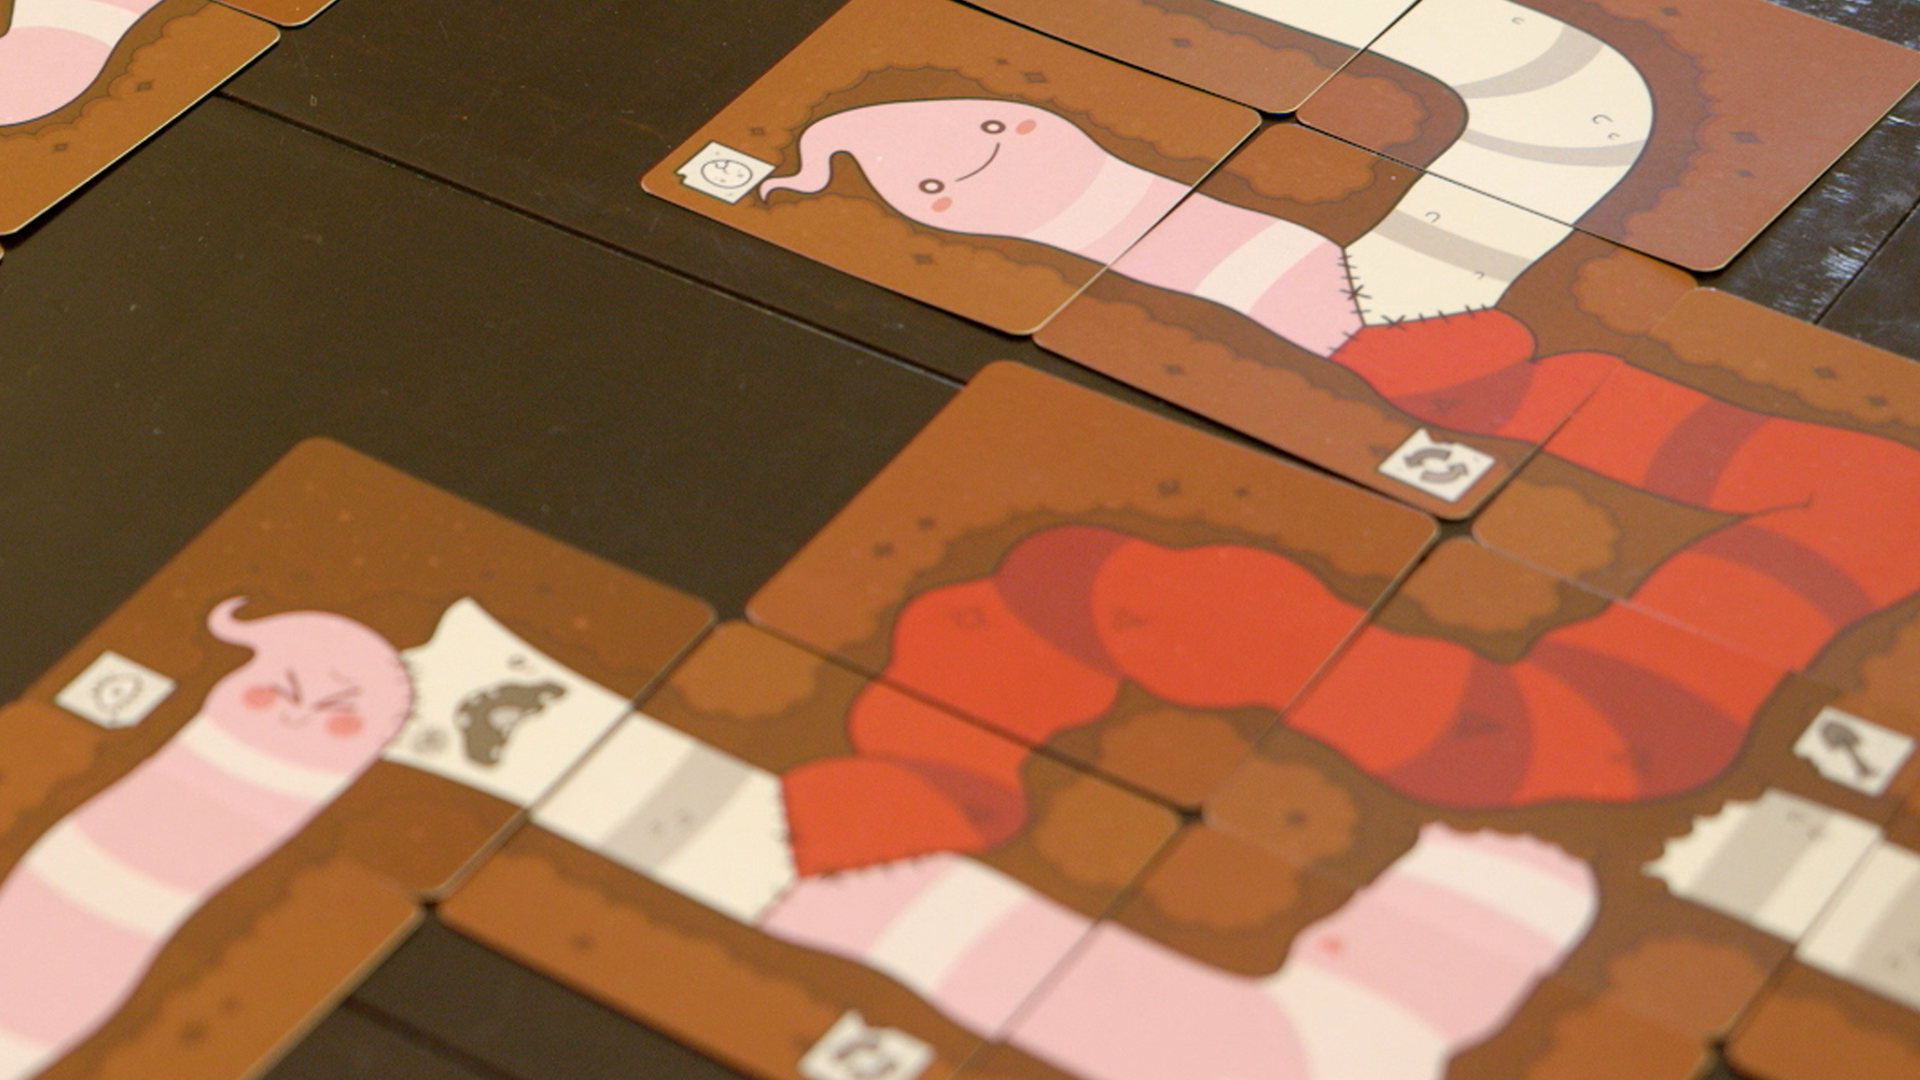 Image for Tapeworm is a delightfully gross card game mash-up of Uno and Snake from Binding of Isaac creator